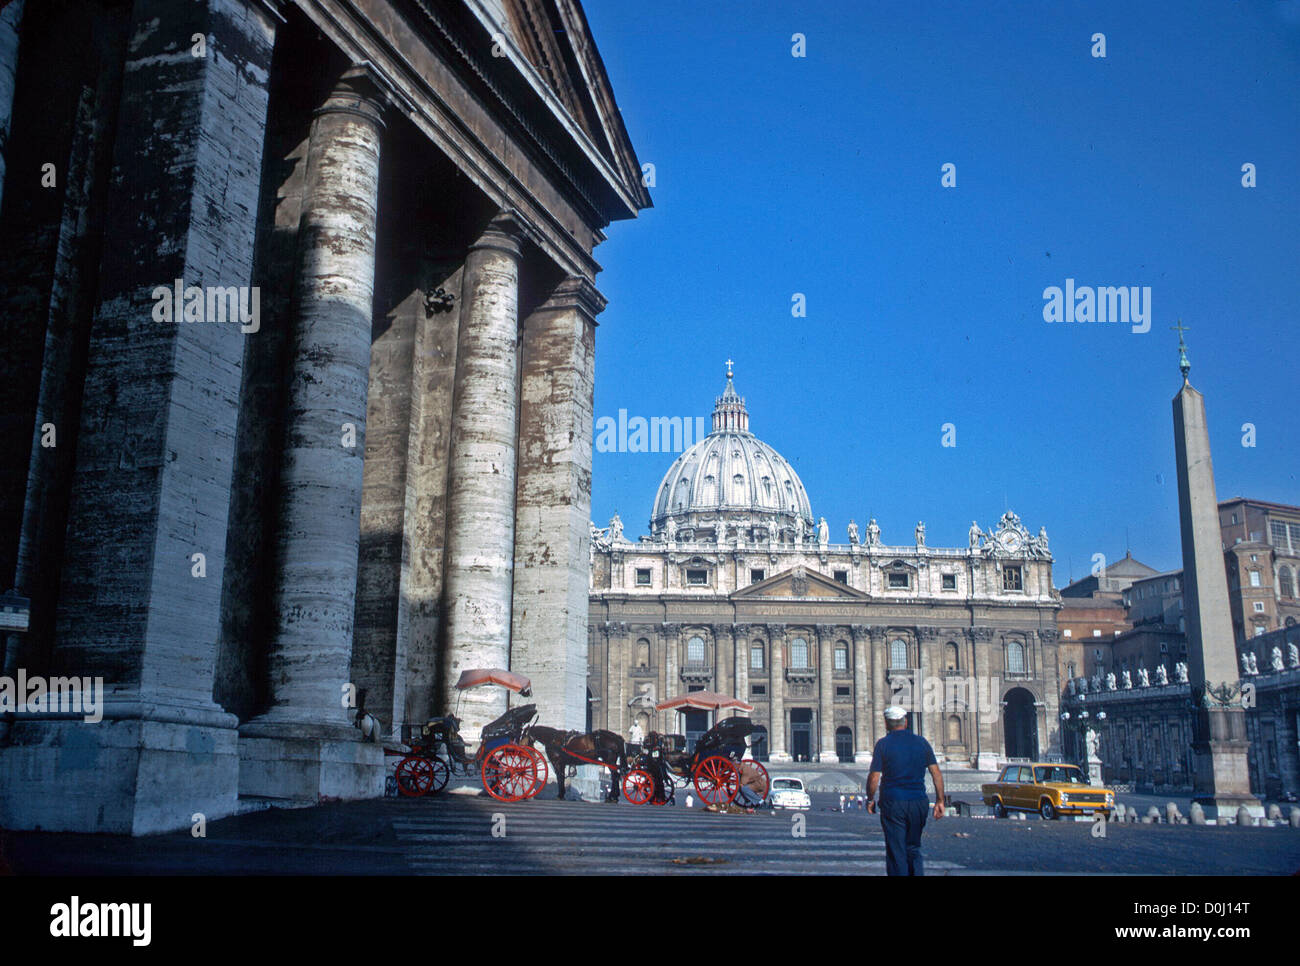 St Peter's Basilica with blue sky and carriages and figures lending scale. Rome Italy Stock Photo